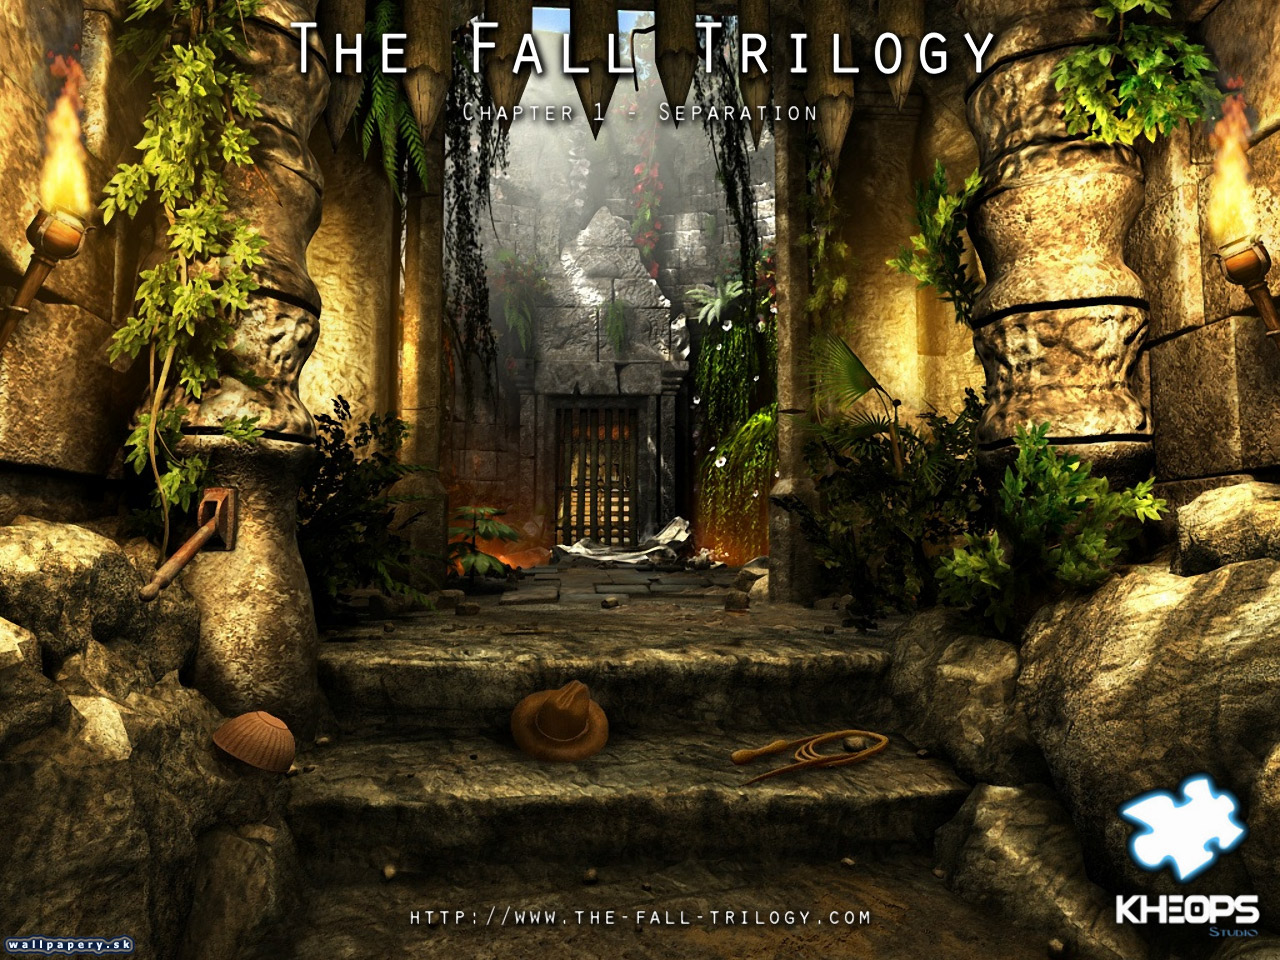 The Fall Trilogy - Chapter 1: Separation - wallpaper 14